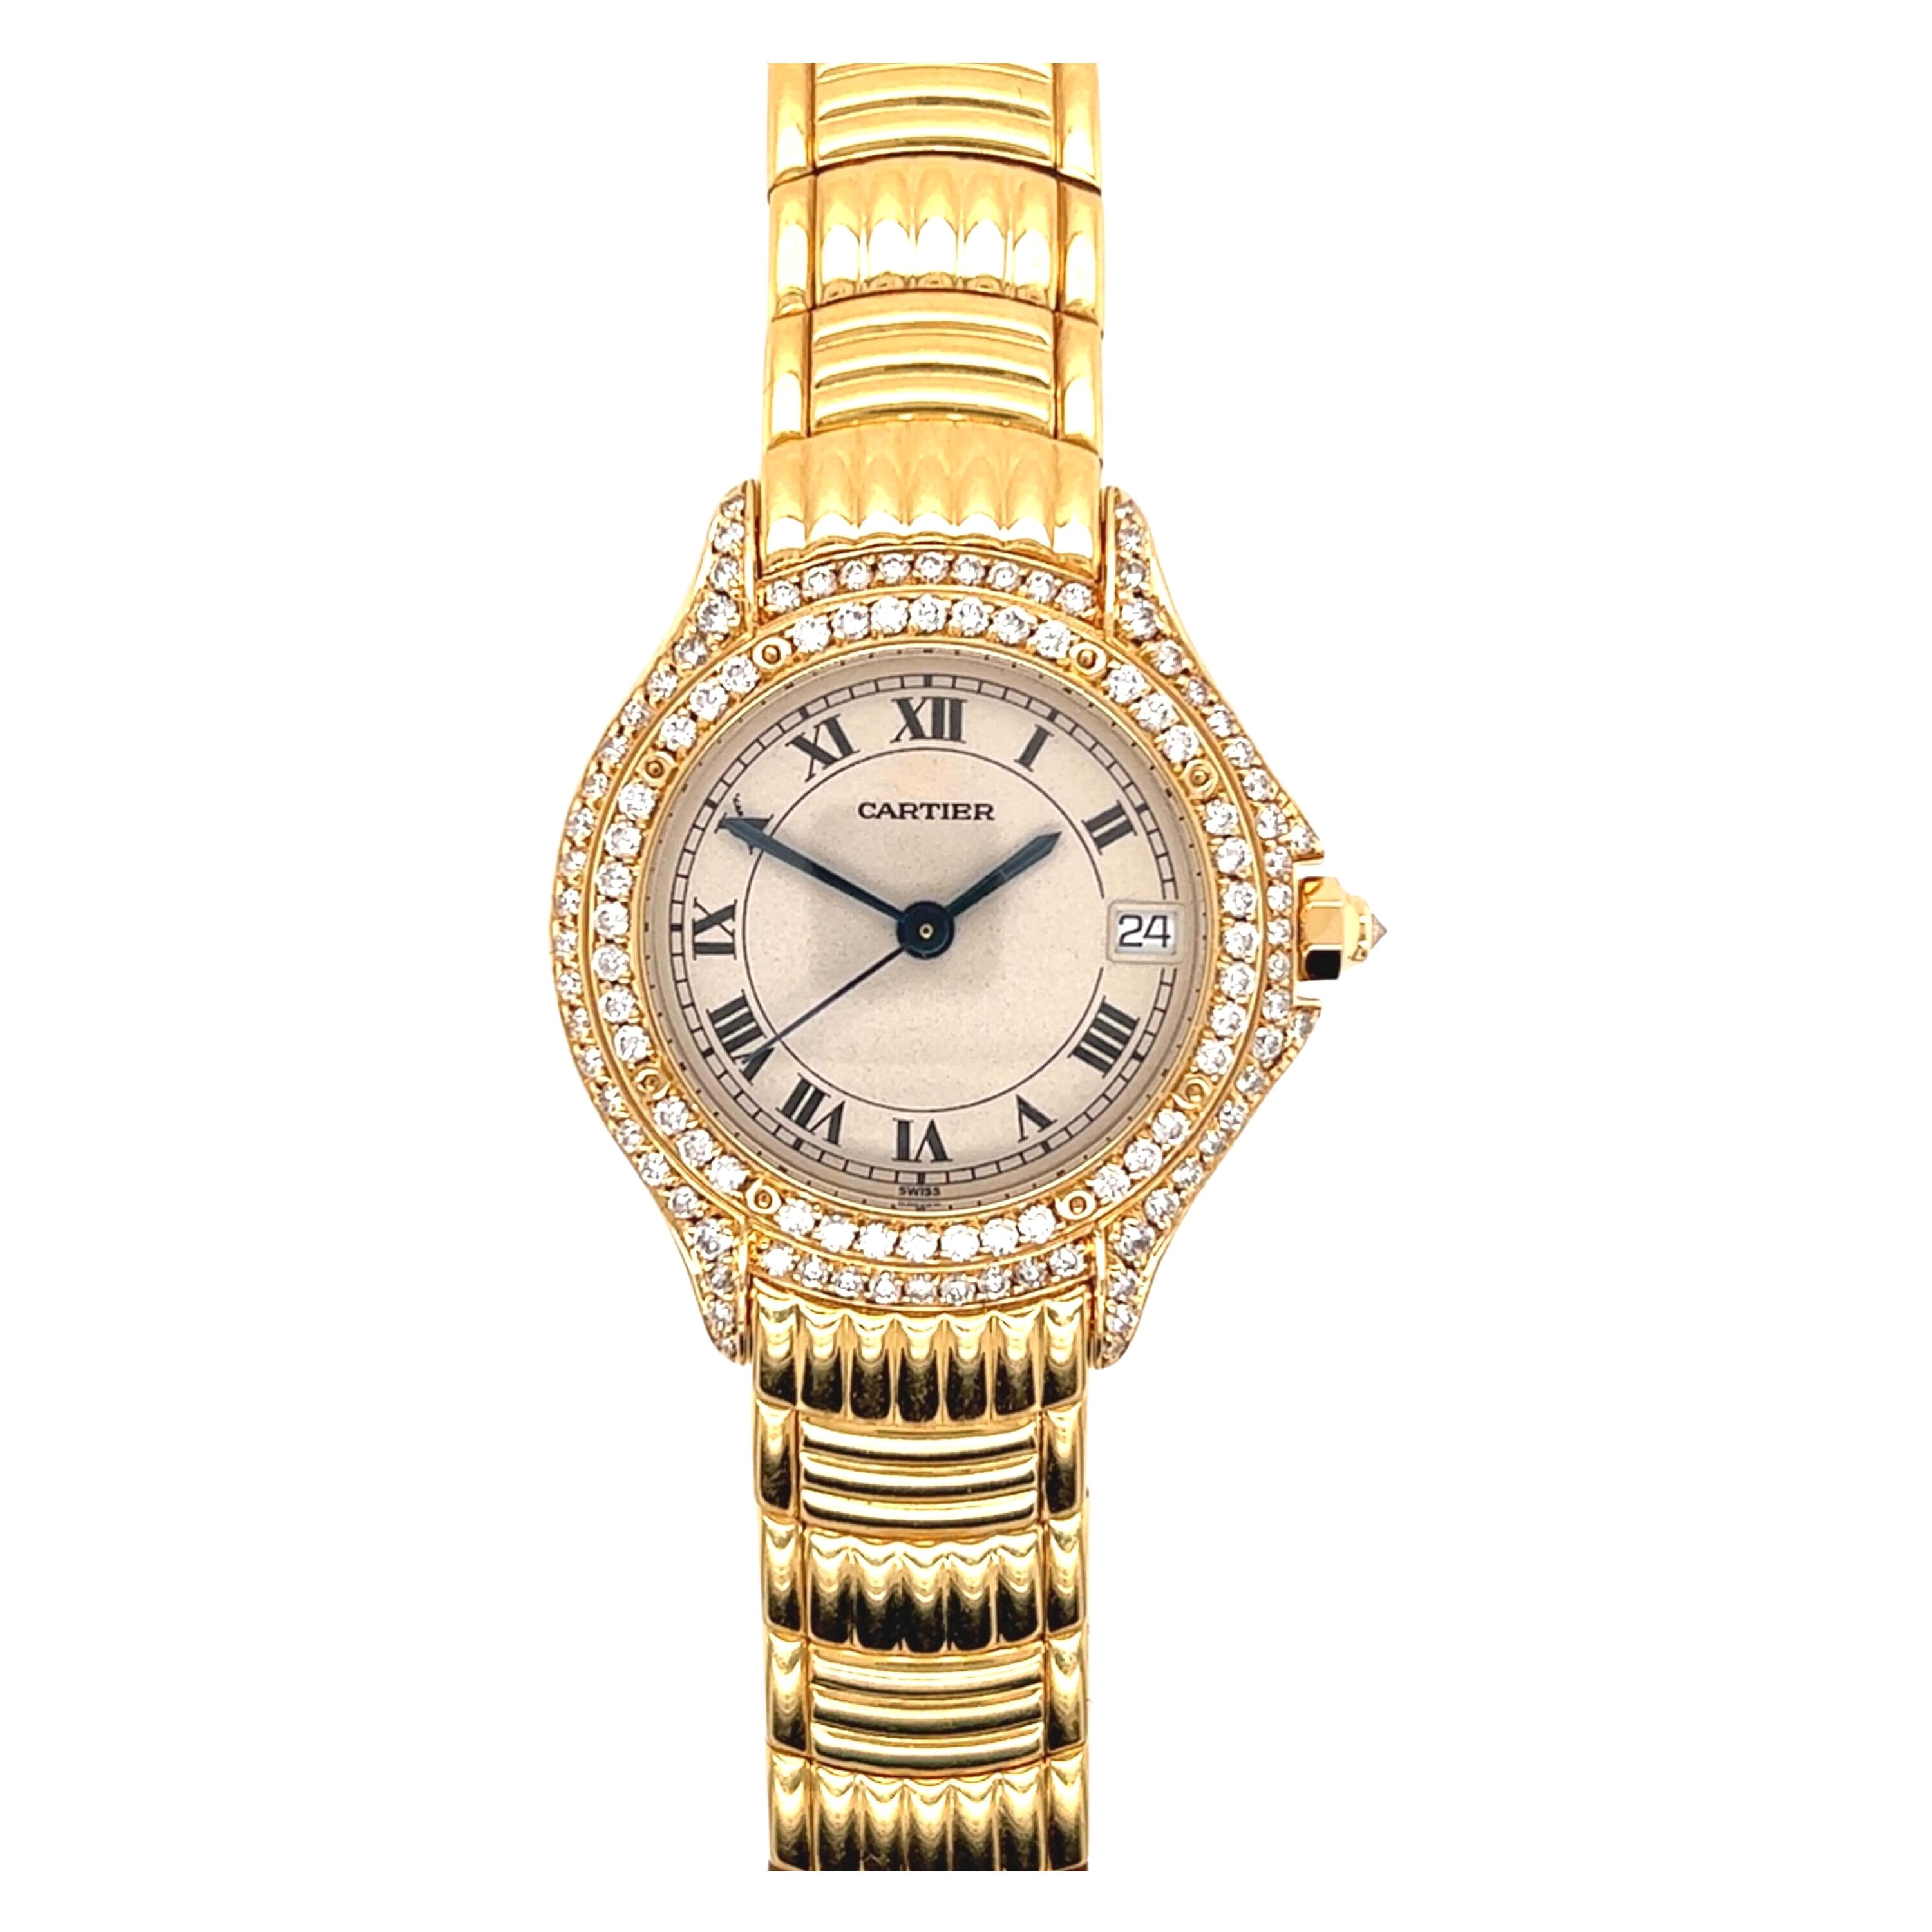 Cartier 'Vendome' Gold and Diamond Watch, Ref. 834501A6 at 1stDibs ...